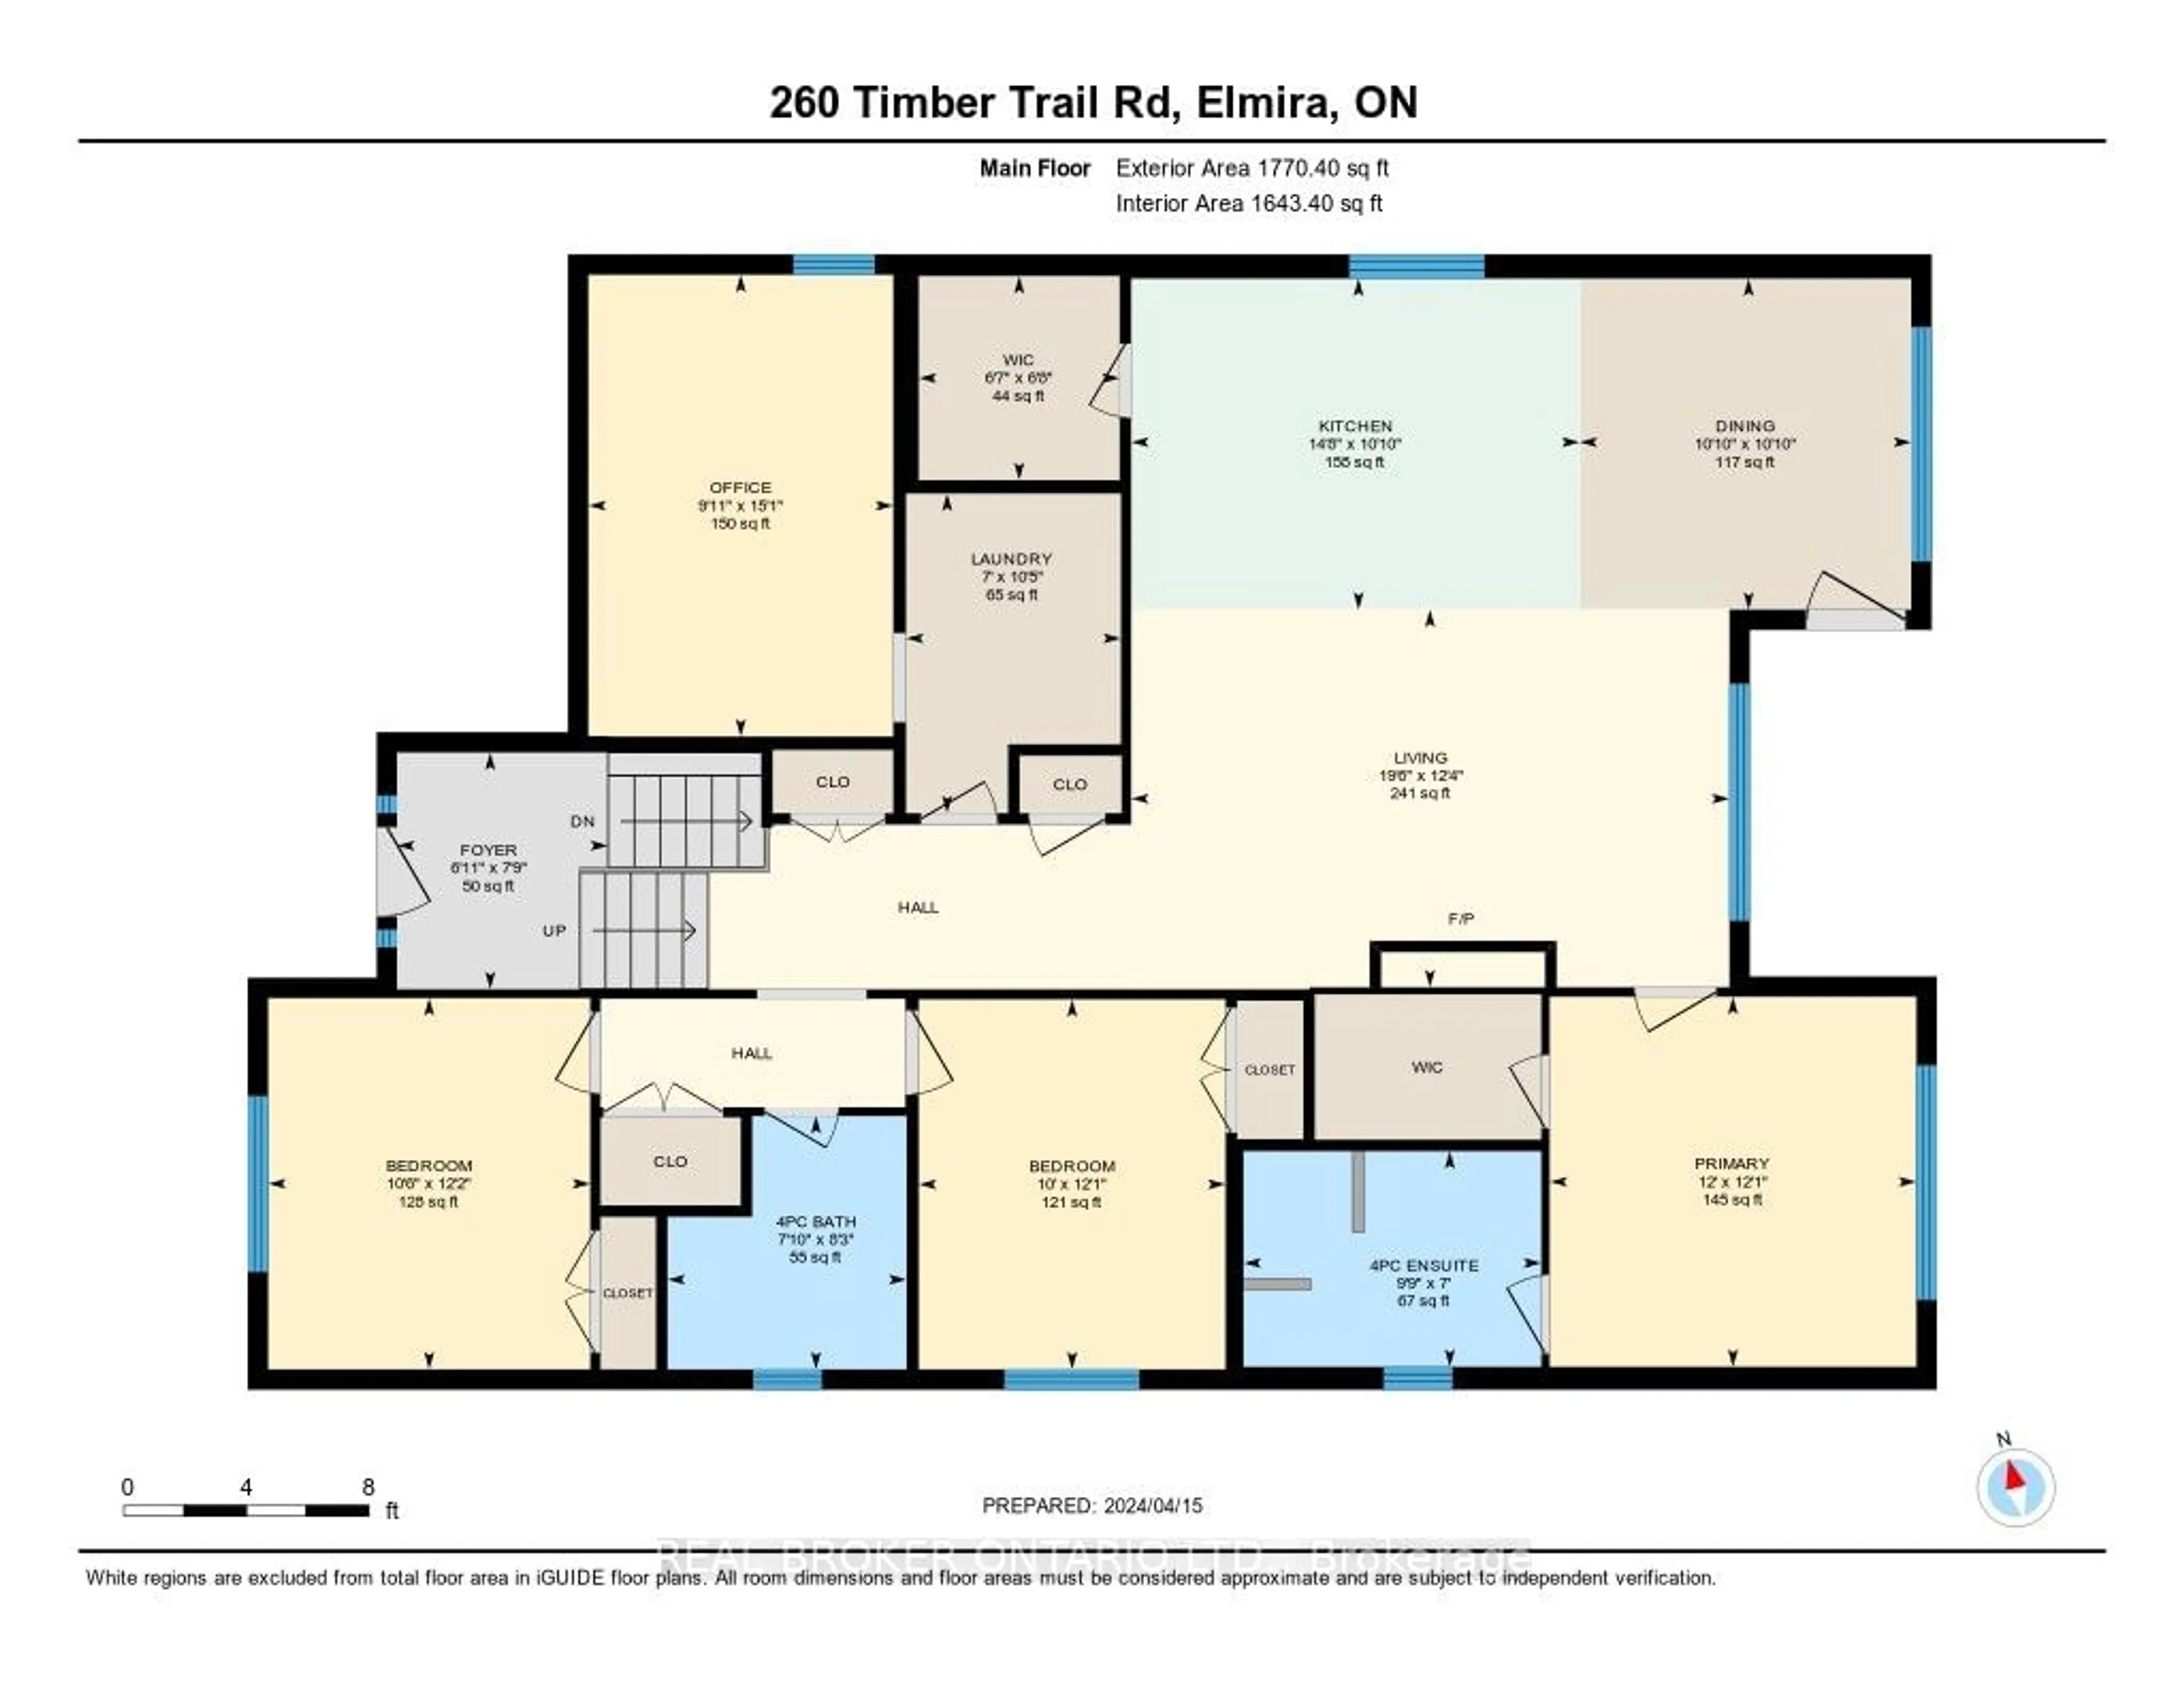 Floor plan for 260 Timber Trail Rd, Woolwich Ontario N3B 0C7